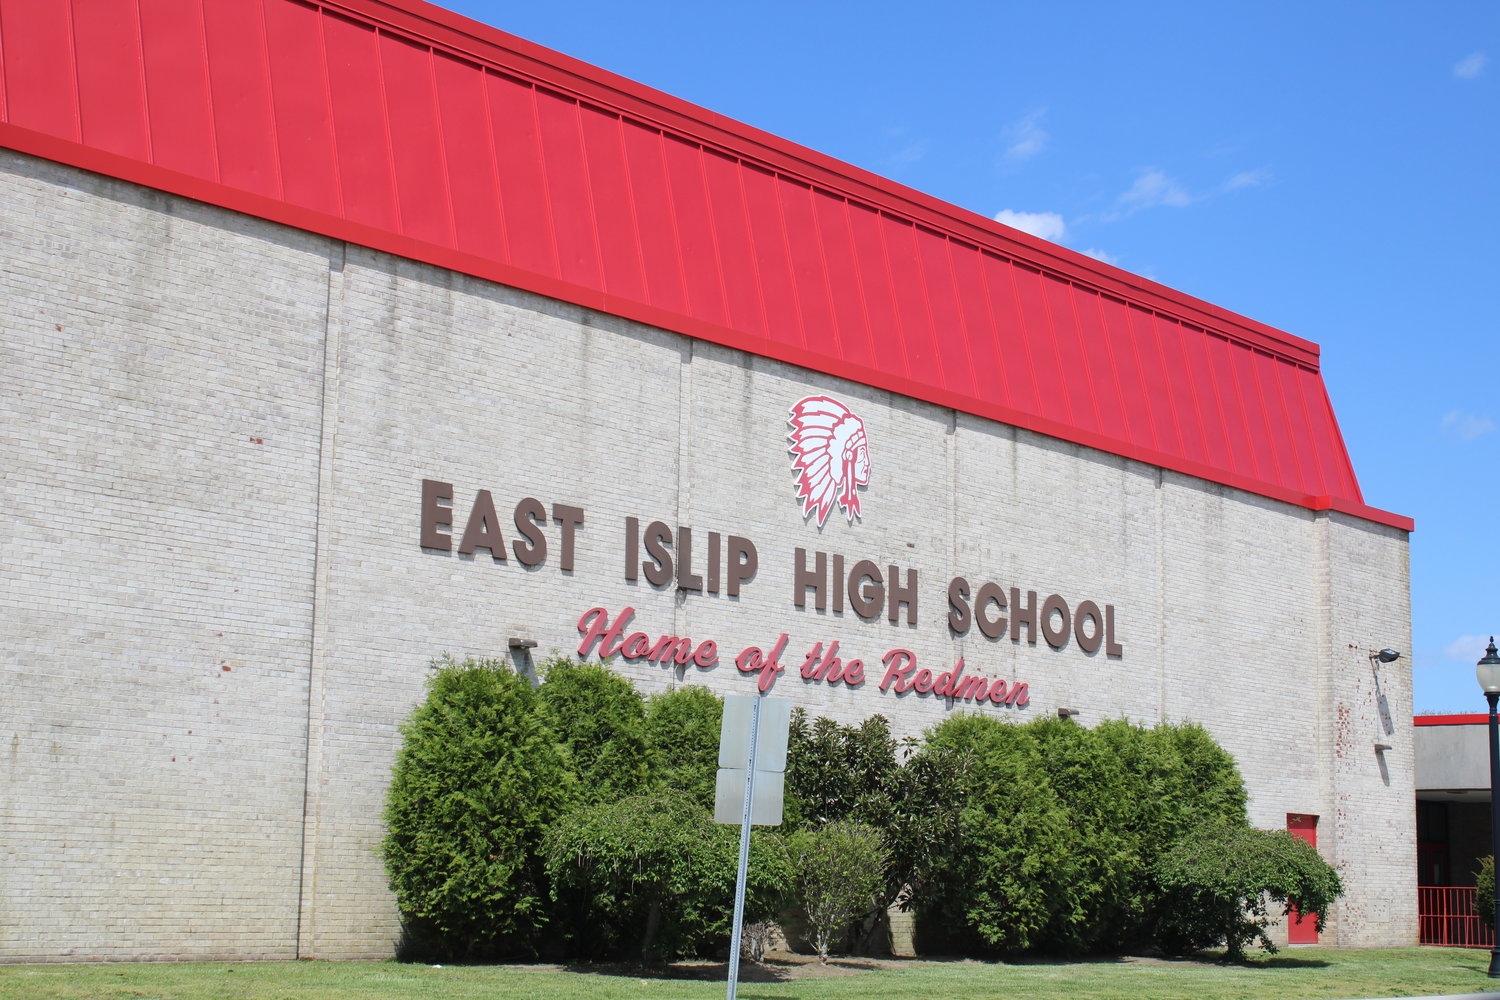 East Islip Union Free School District has announced that it has found two tabulation errors in the board of education-certified candidate results. A petition is expected to be filed with the commissioner of education to approve the correct results.